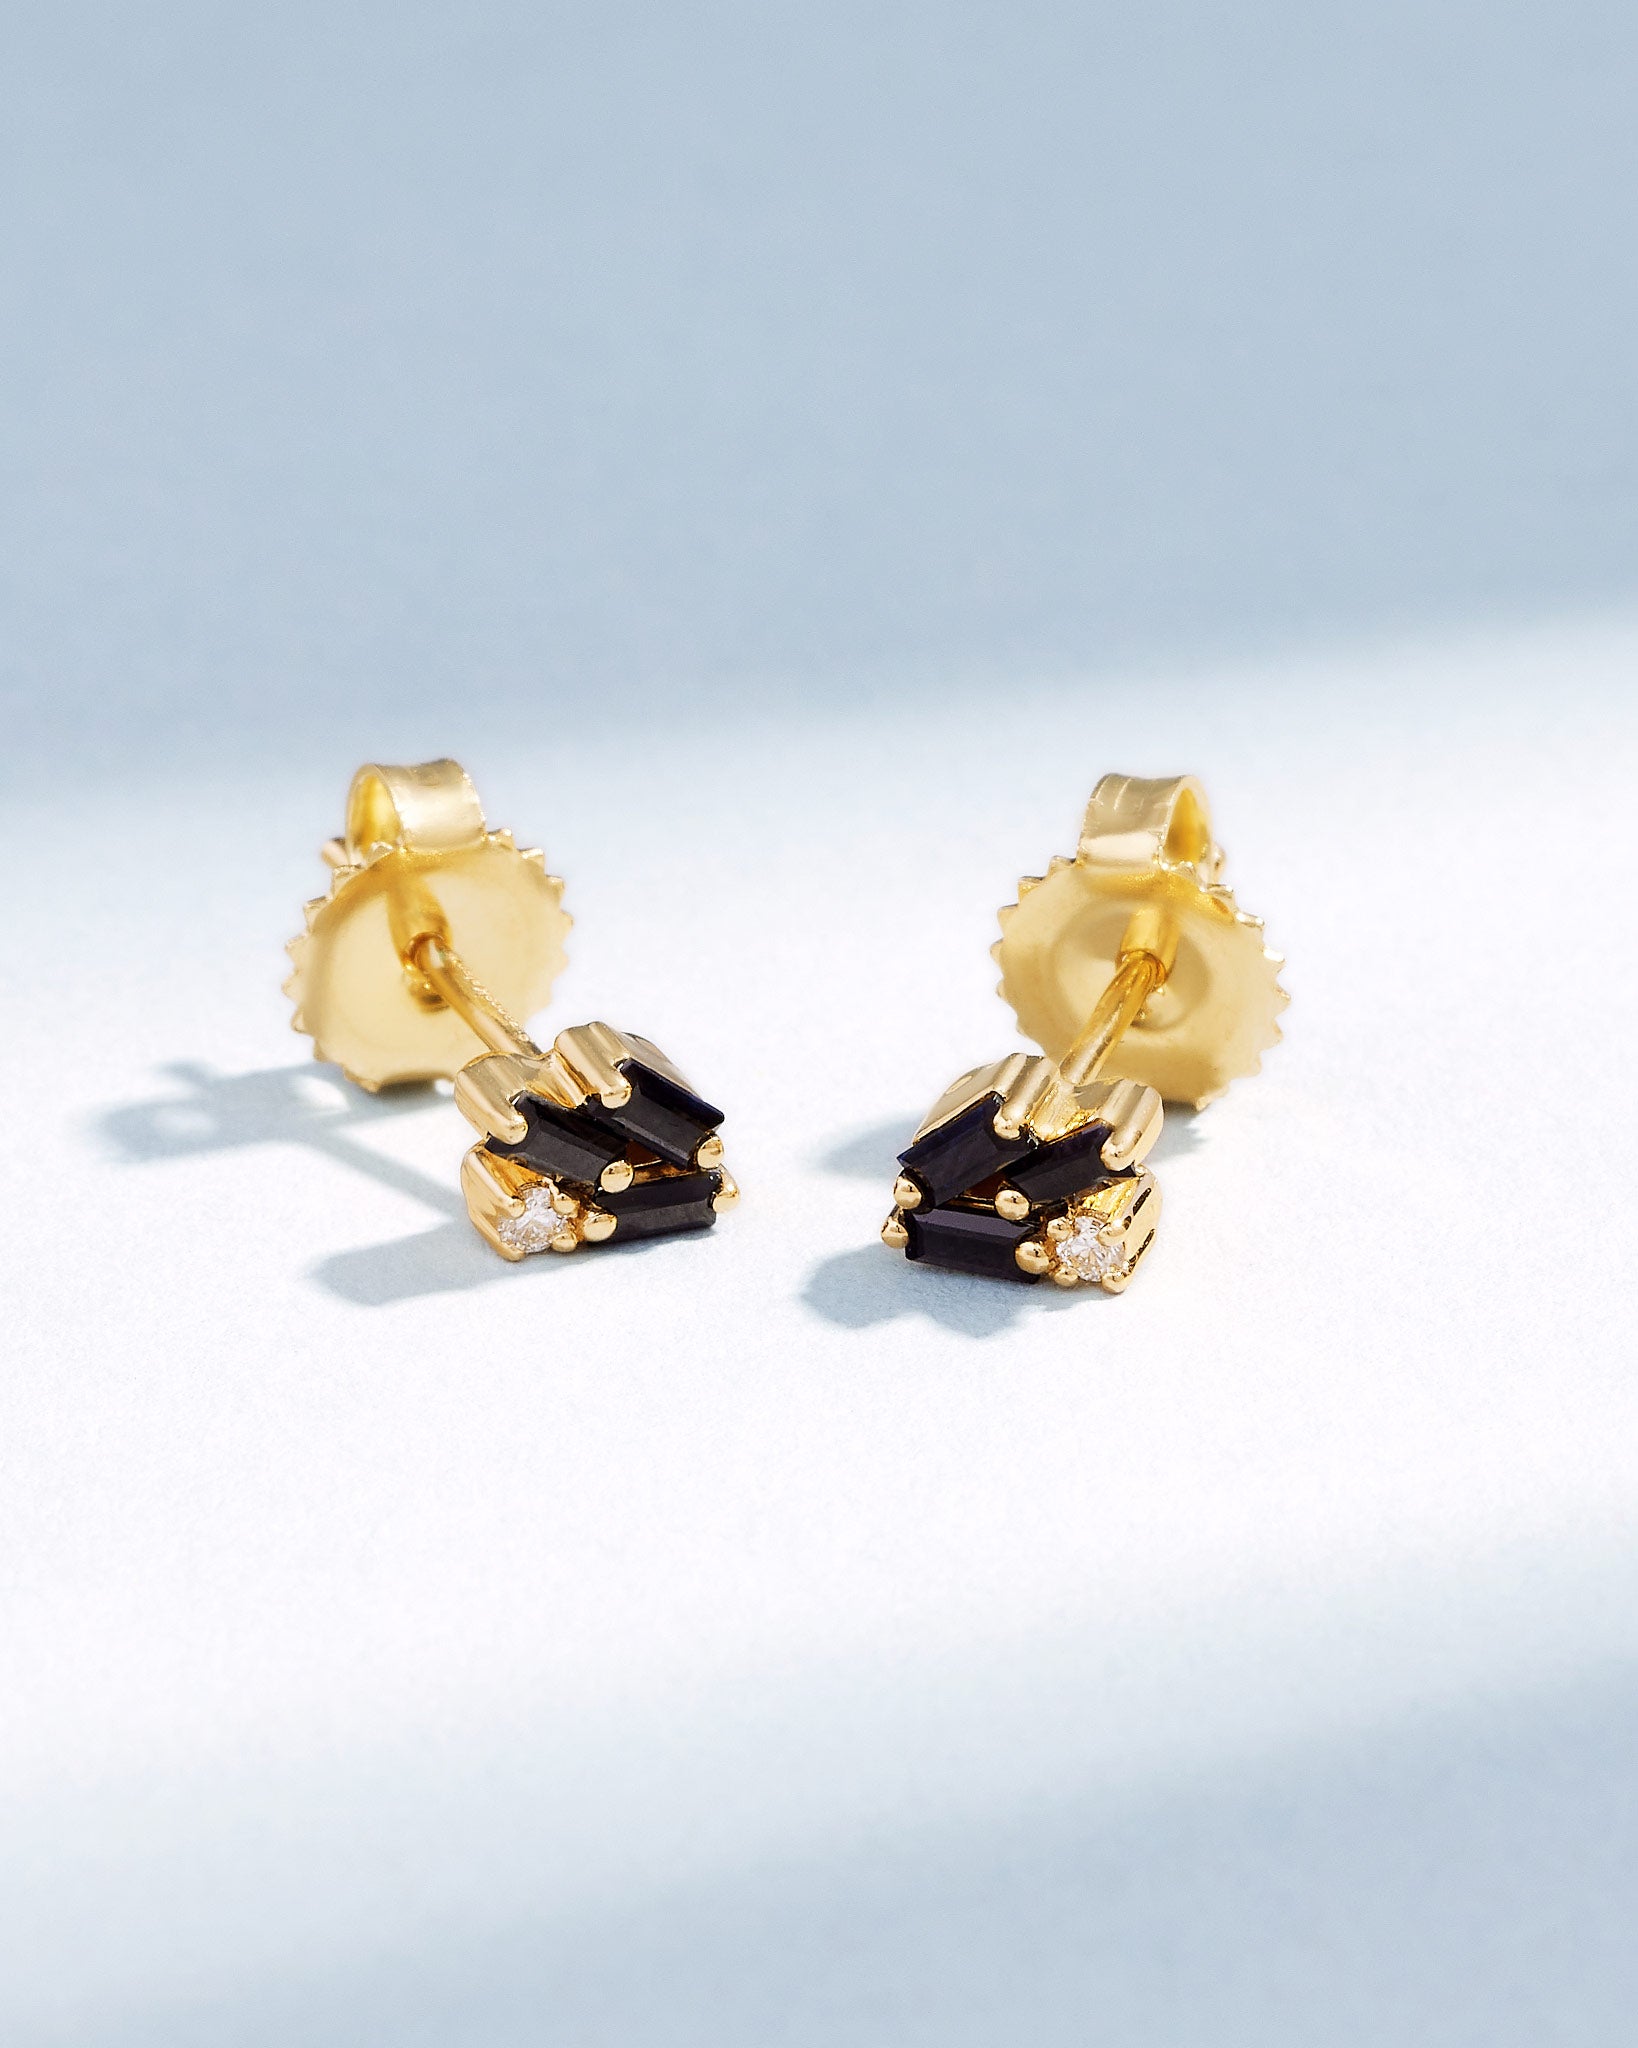 Suzanne Kalan Bold Cluster Black Sapphire Studs in 18k yellow gold